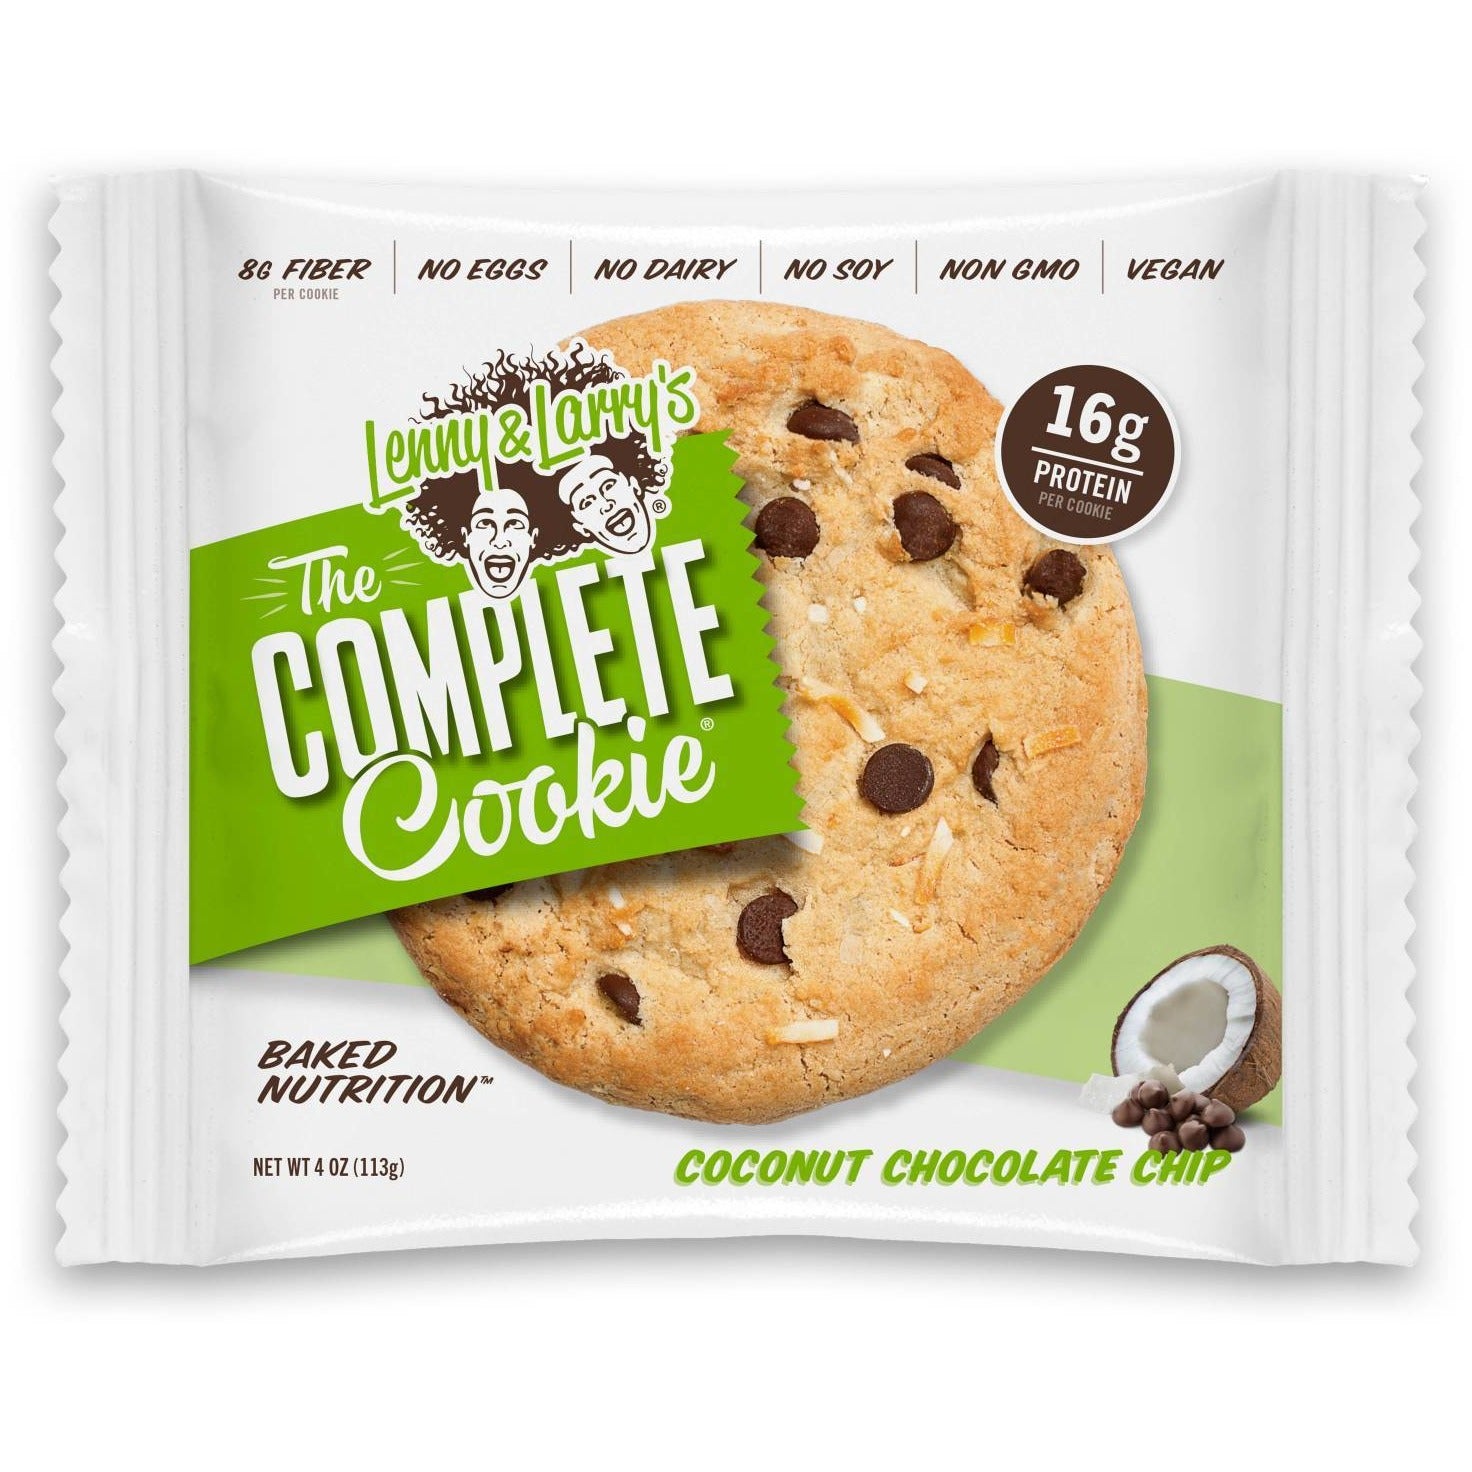 Lenny & Larry's Vegan Protein Cookie (1 cookie) lenny-larrys-protein-cookie-1-cookie Protein Snacks Coconut Chocolate Chip Lenny & Larry